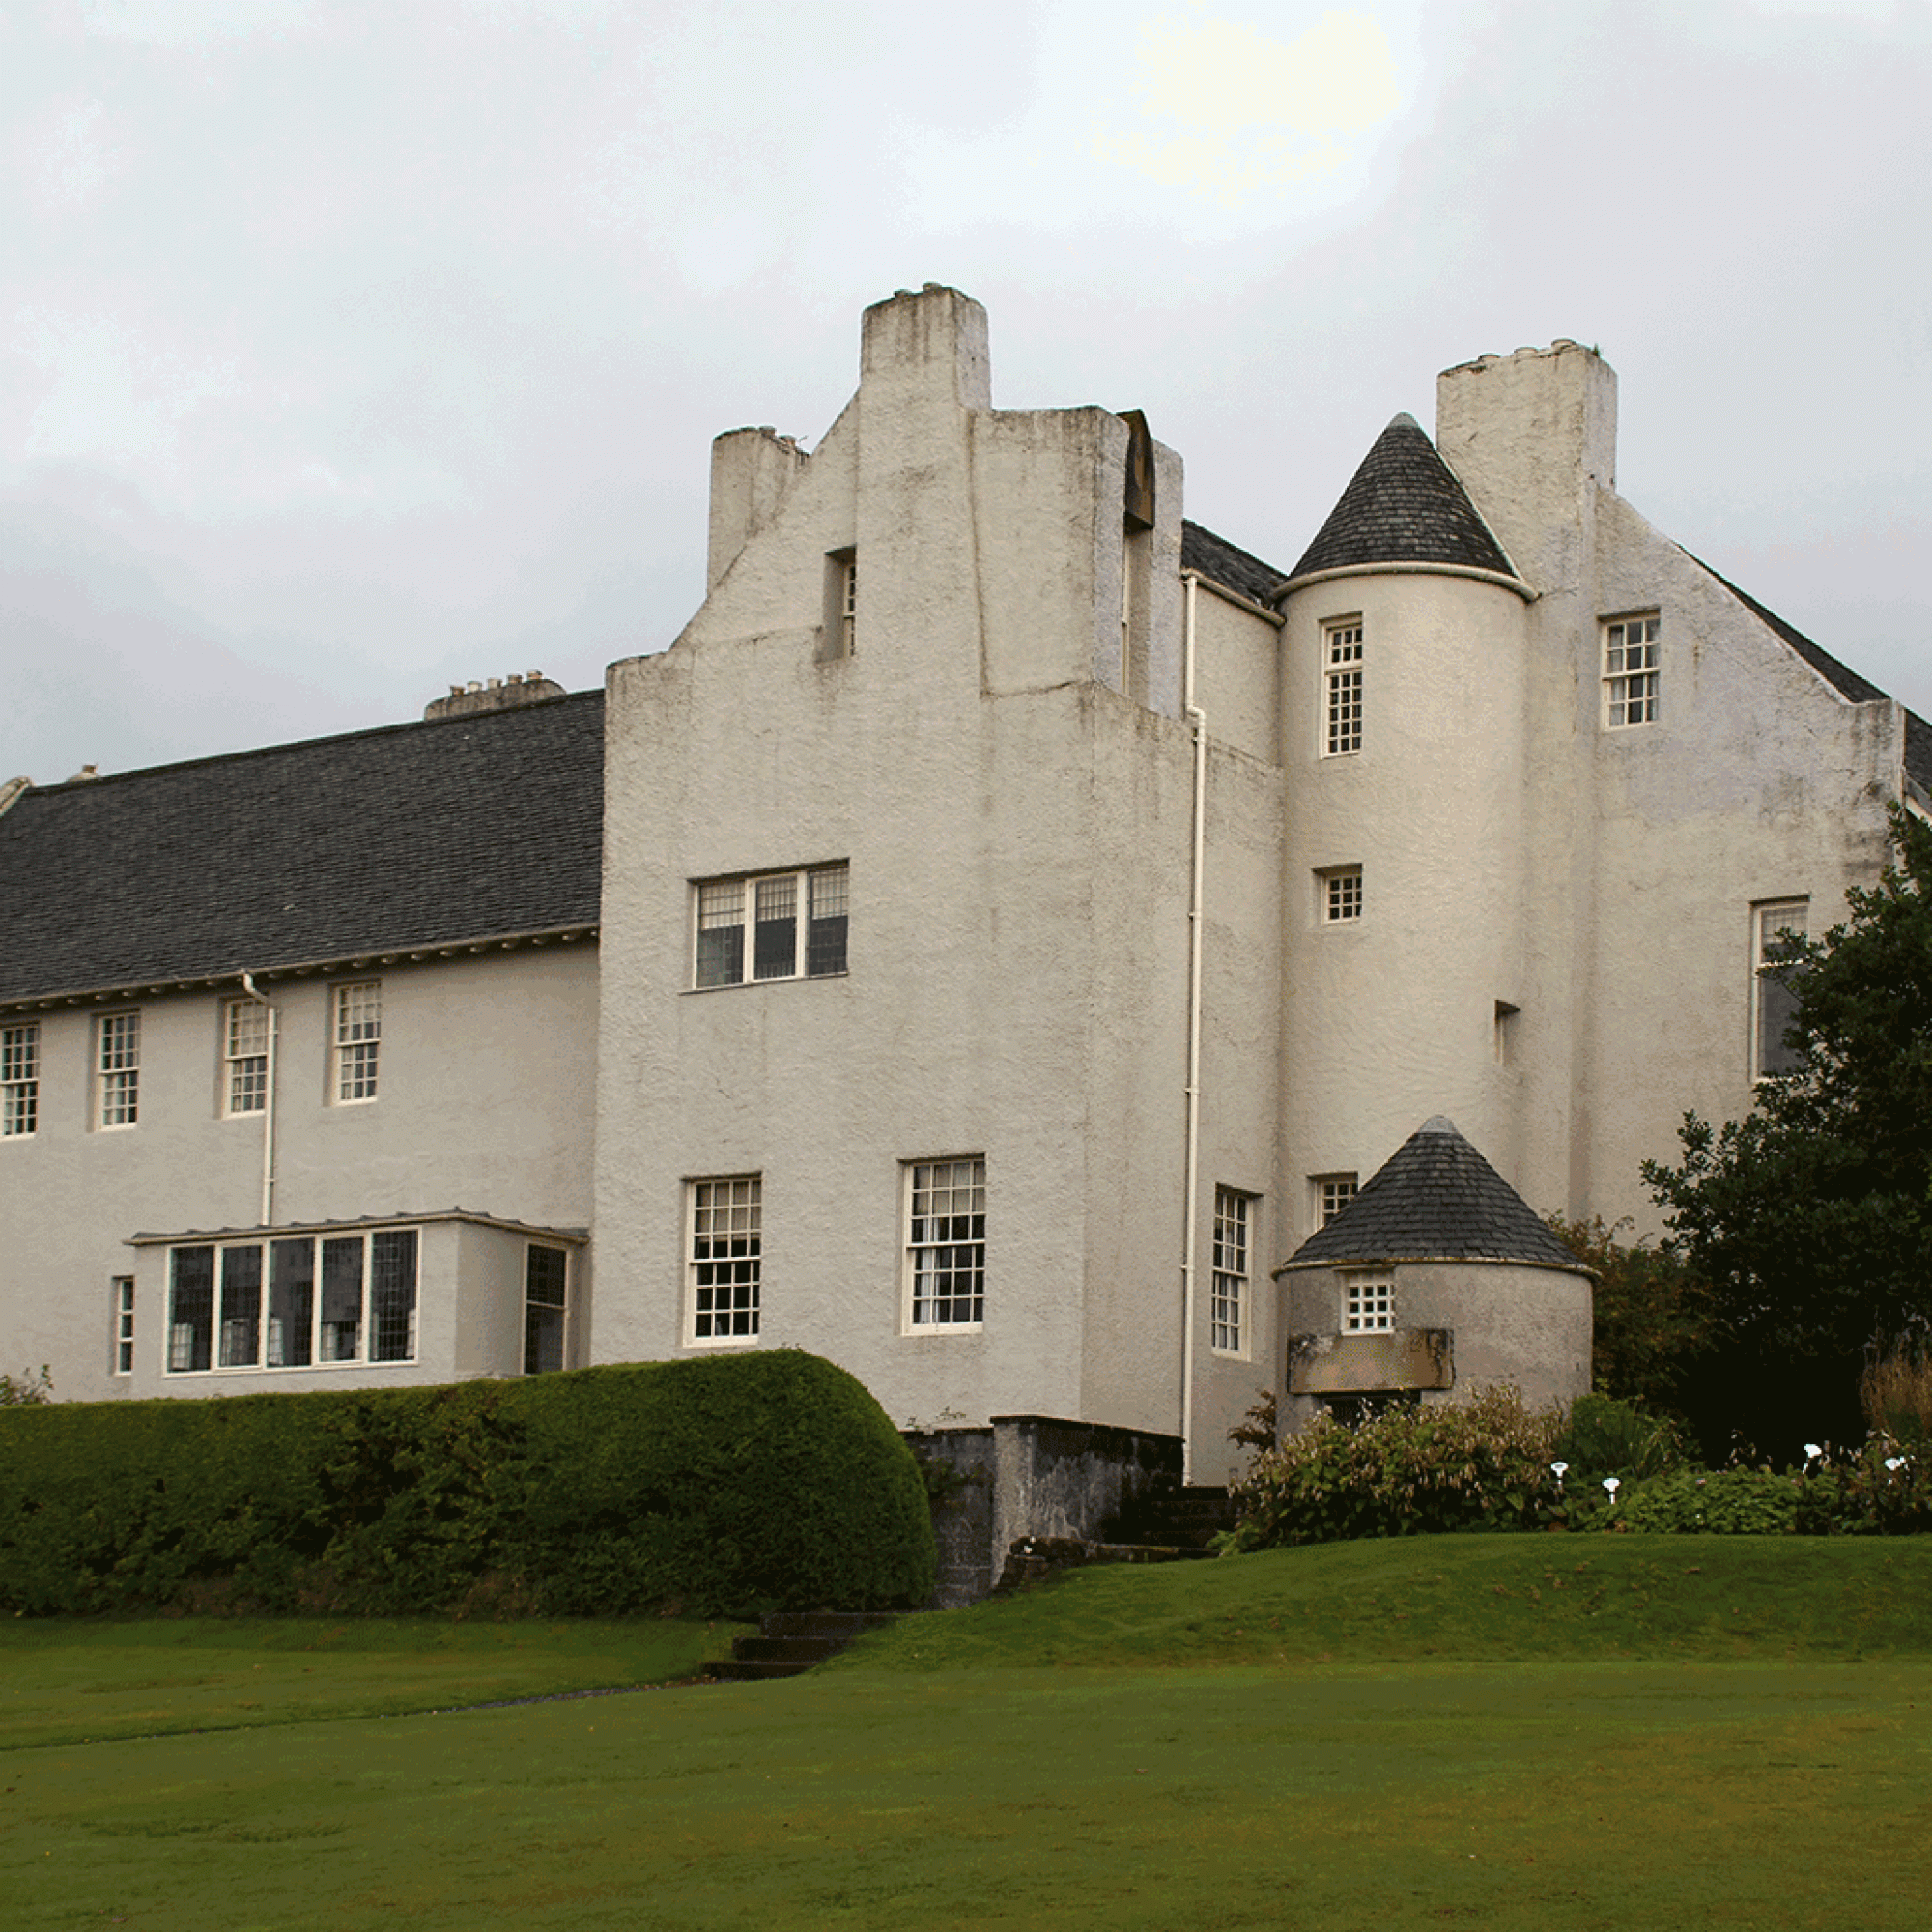 Hill House